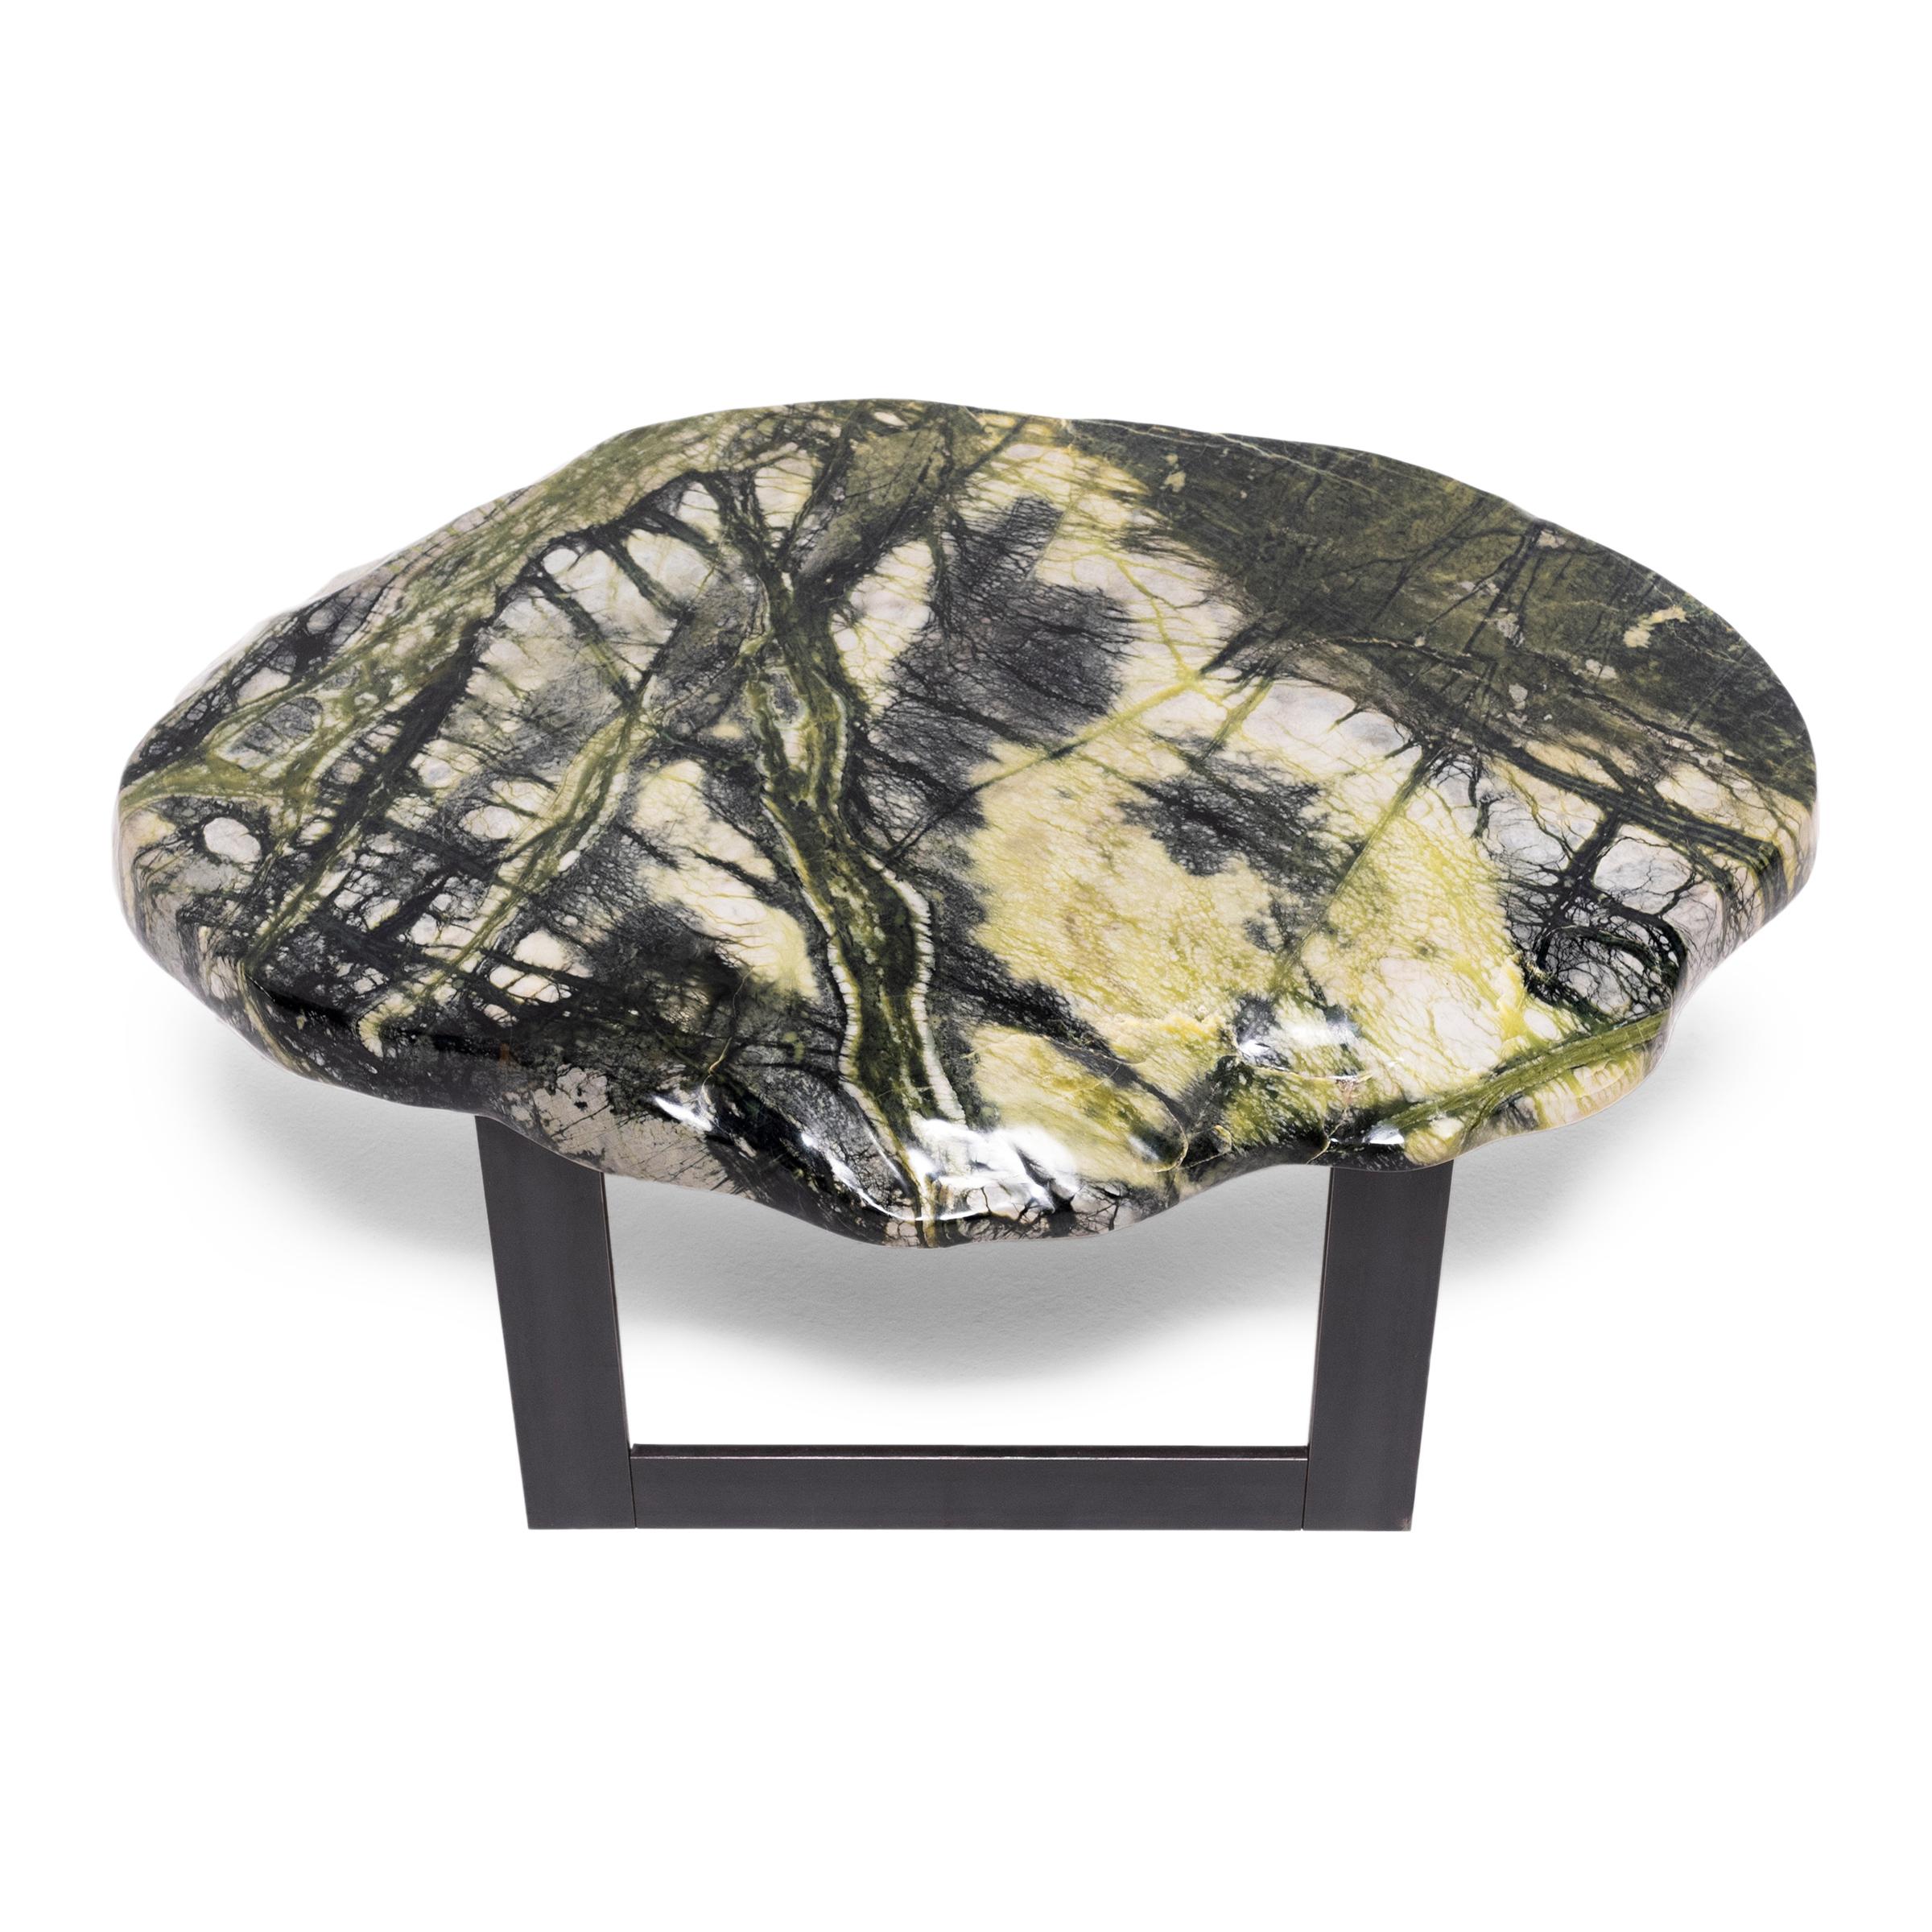 Prized by ancient scholars, meditation stones invigorated the imaginations of poets, painters, and calligraphers. The abstract shape and veining of the greenery stone specimen that tops this table is composed of jadeite, moss agate, serpentine, and